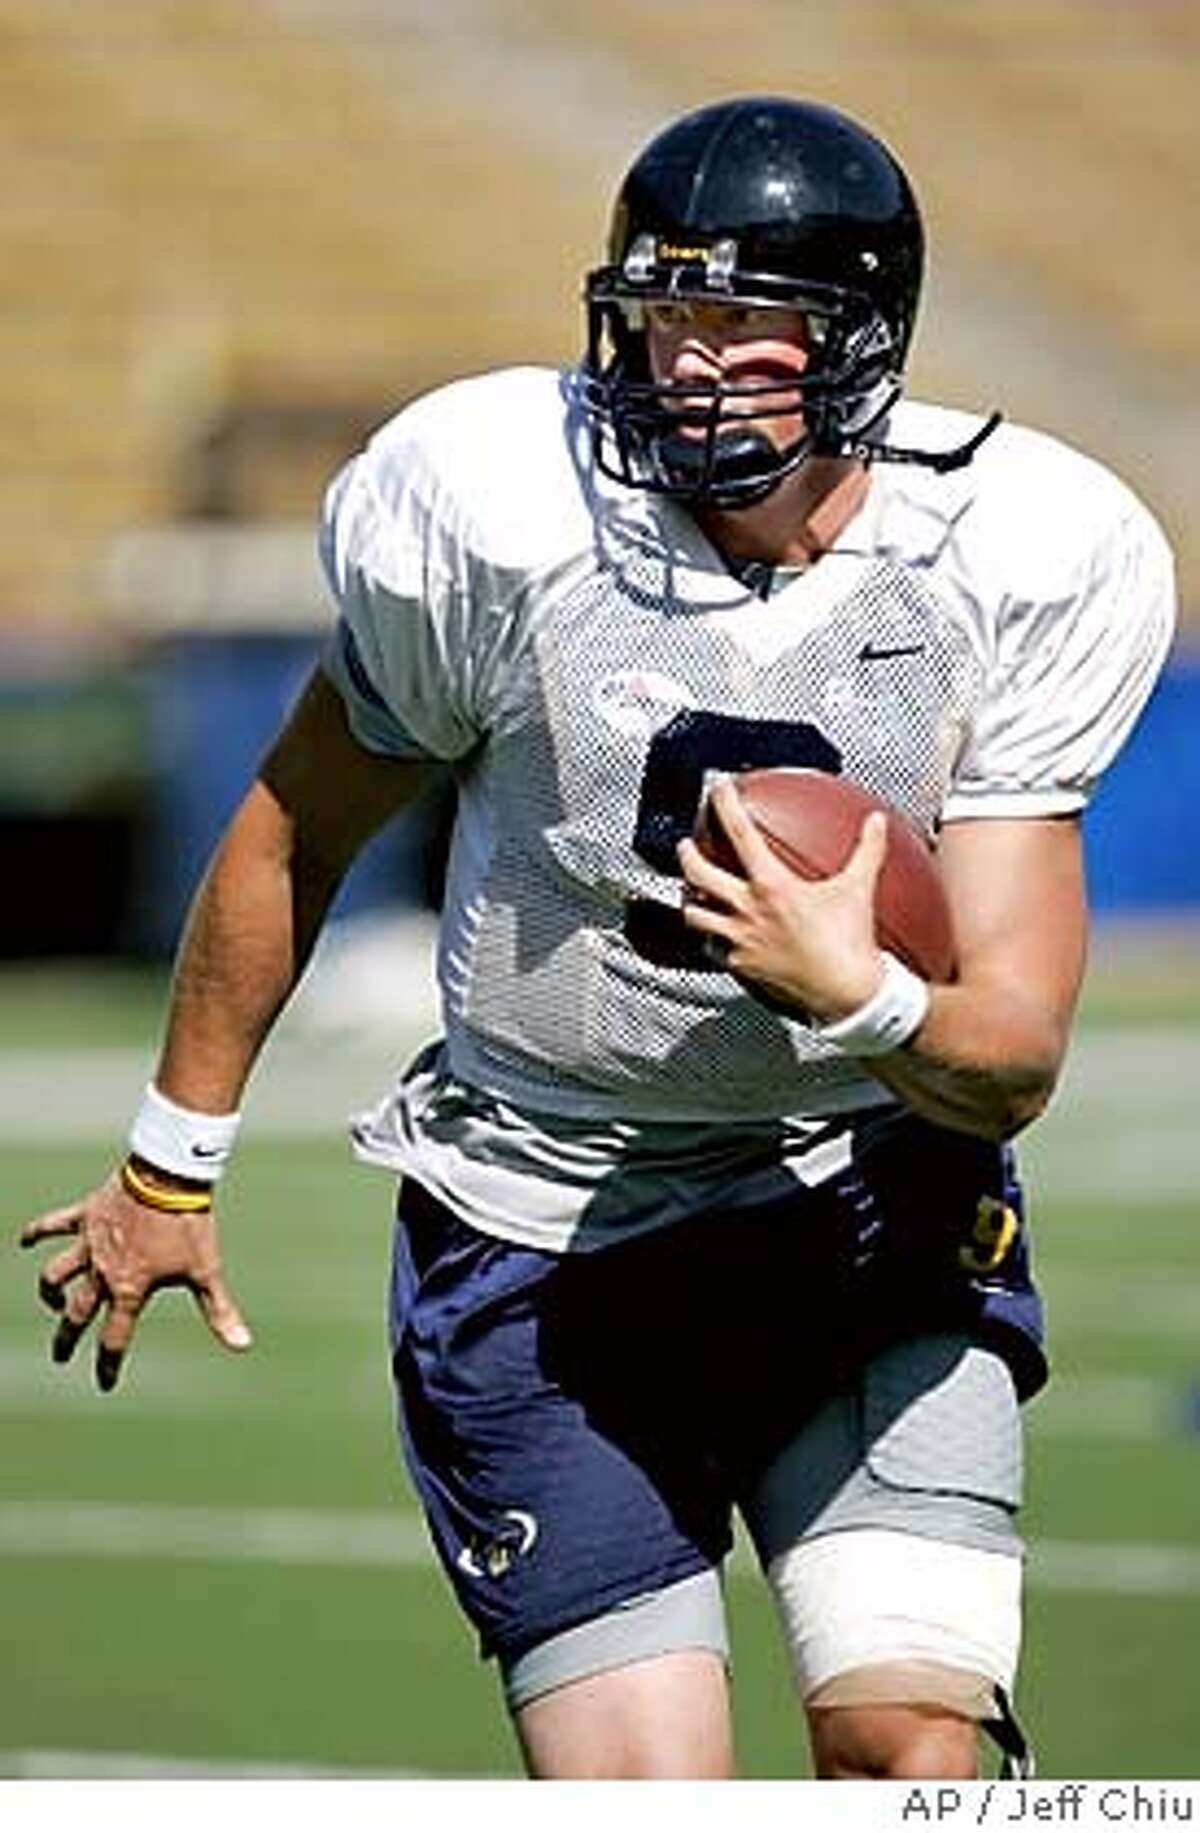 California quarterback Nate Longshore practices in Berkeley, Calif., Thursday, Aug. 11, 2005. Coach Tedford is expected to announce his decision on a starting quarterback on Monday, and Longshore appears to be the choice. (AP Photo/Jeff Chiu)